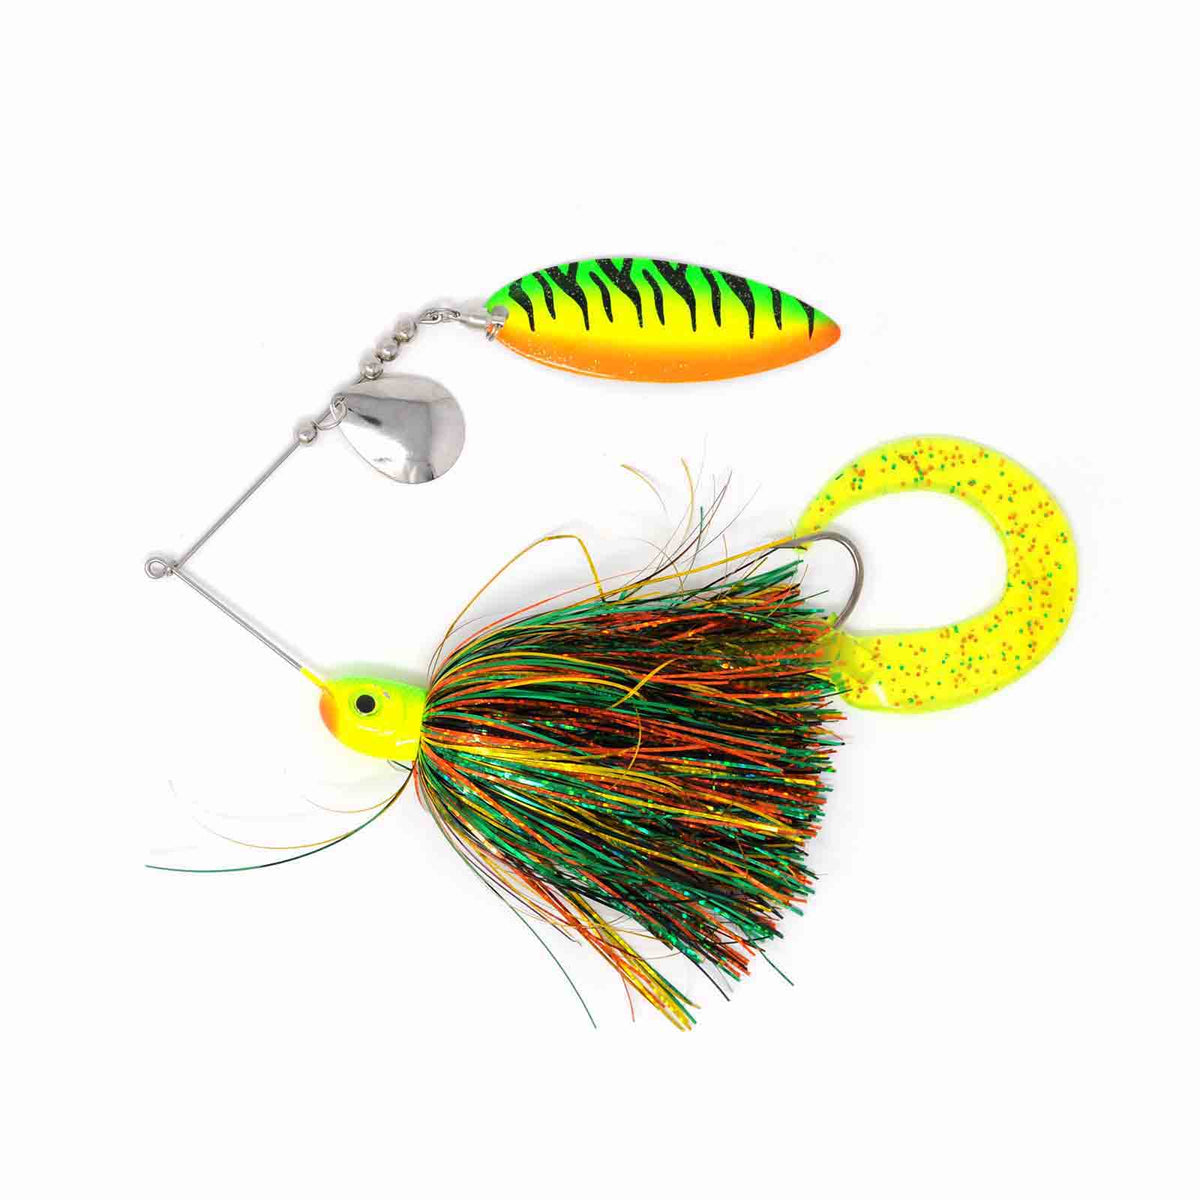 View of Spinnerbaits Esox Assault Spinnerbait Willow 1.5oz Fire Tiger available at EZOKO Pike and Musky Shop